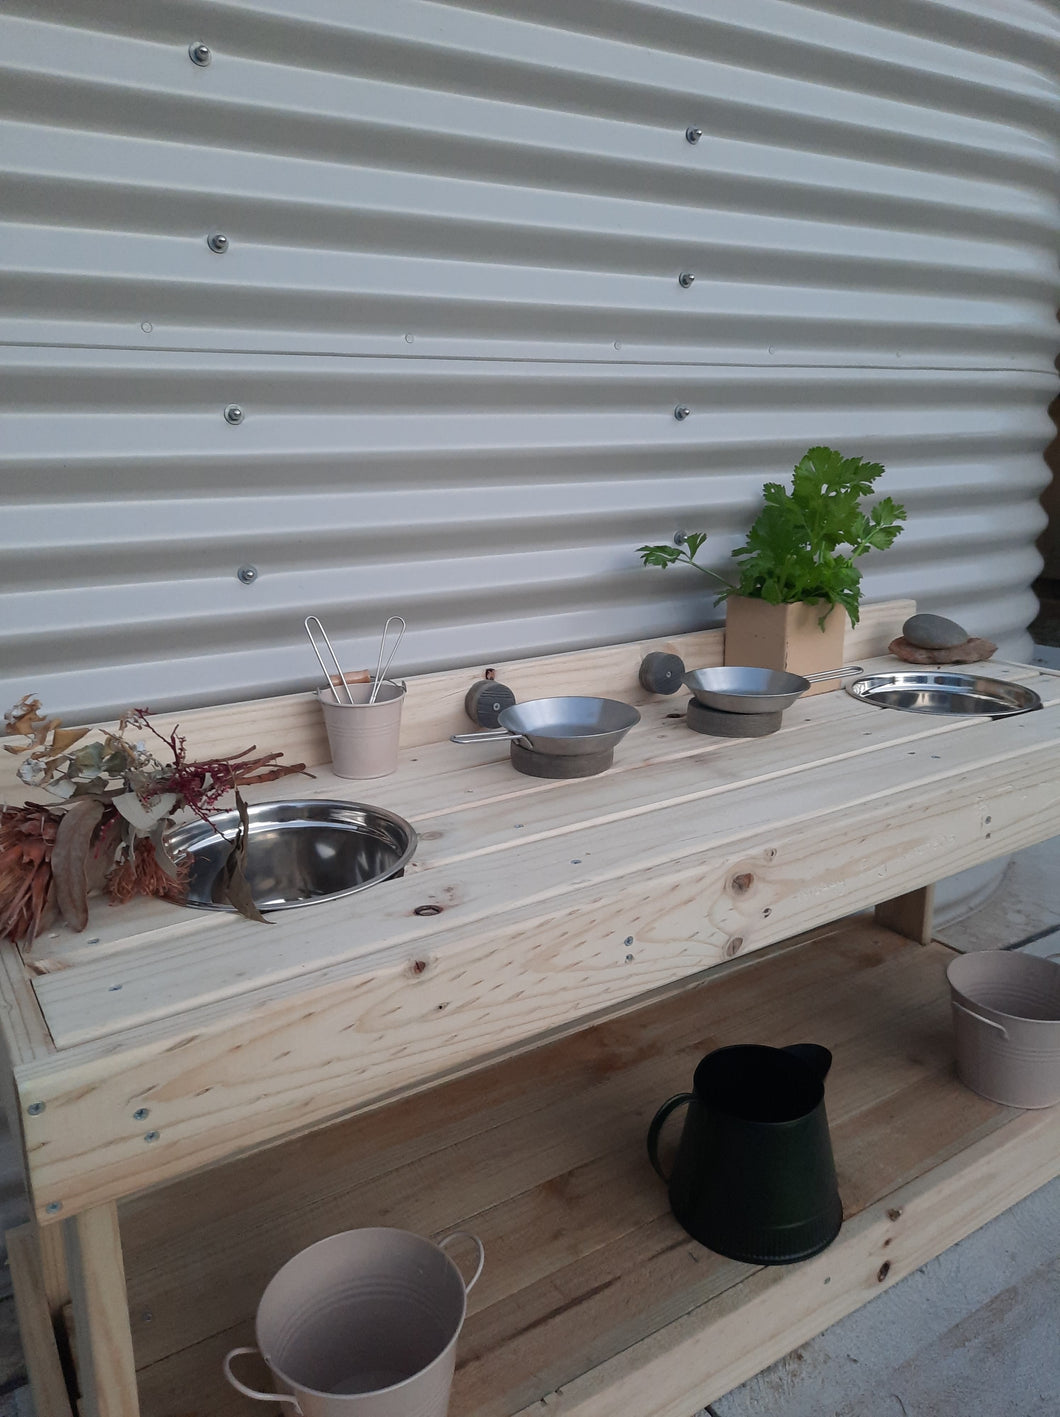 Mud Kitchen ~ with Bowls ~ 'Potion Play' Station ~ Sensory Table ~ Hot Plates